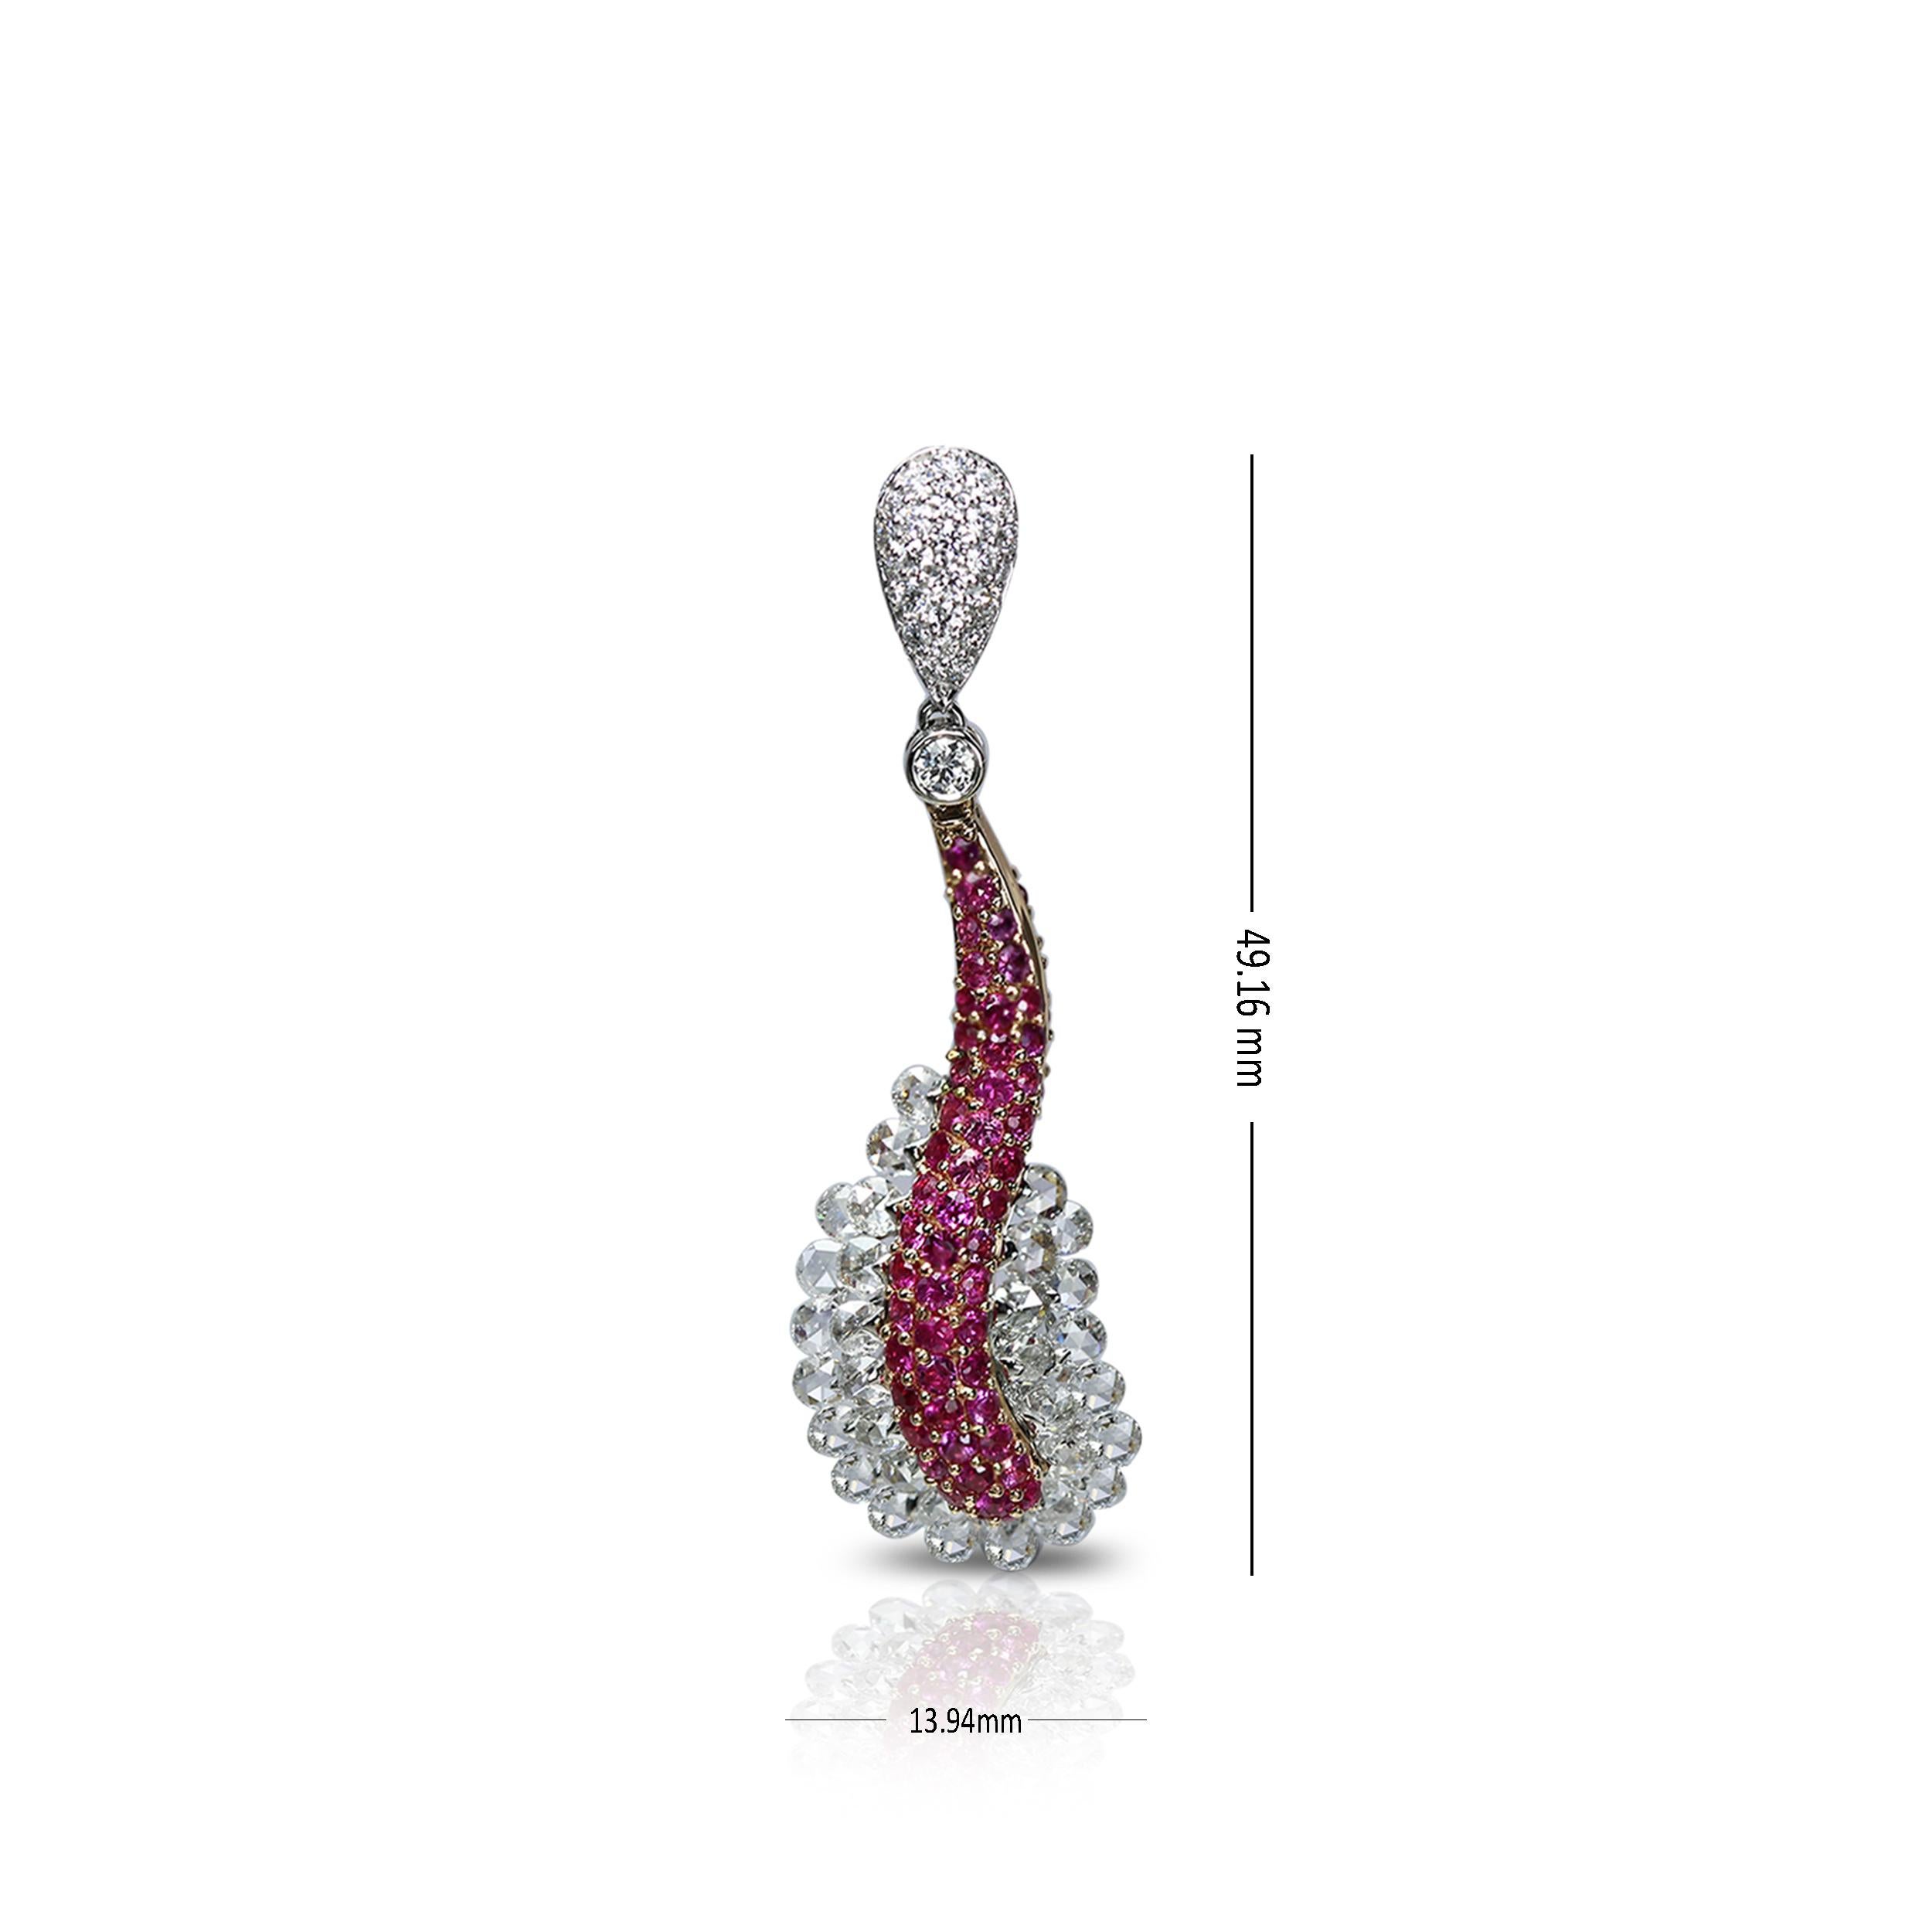 Studio Rêves 18 Karat Rose Cut Diamond and Pink Sapphire Wave Pendant In New Condition For Sale In Mumbai, Maharashtra